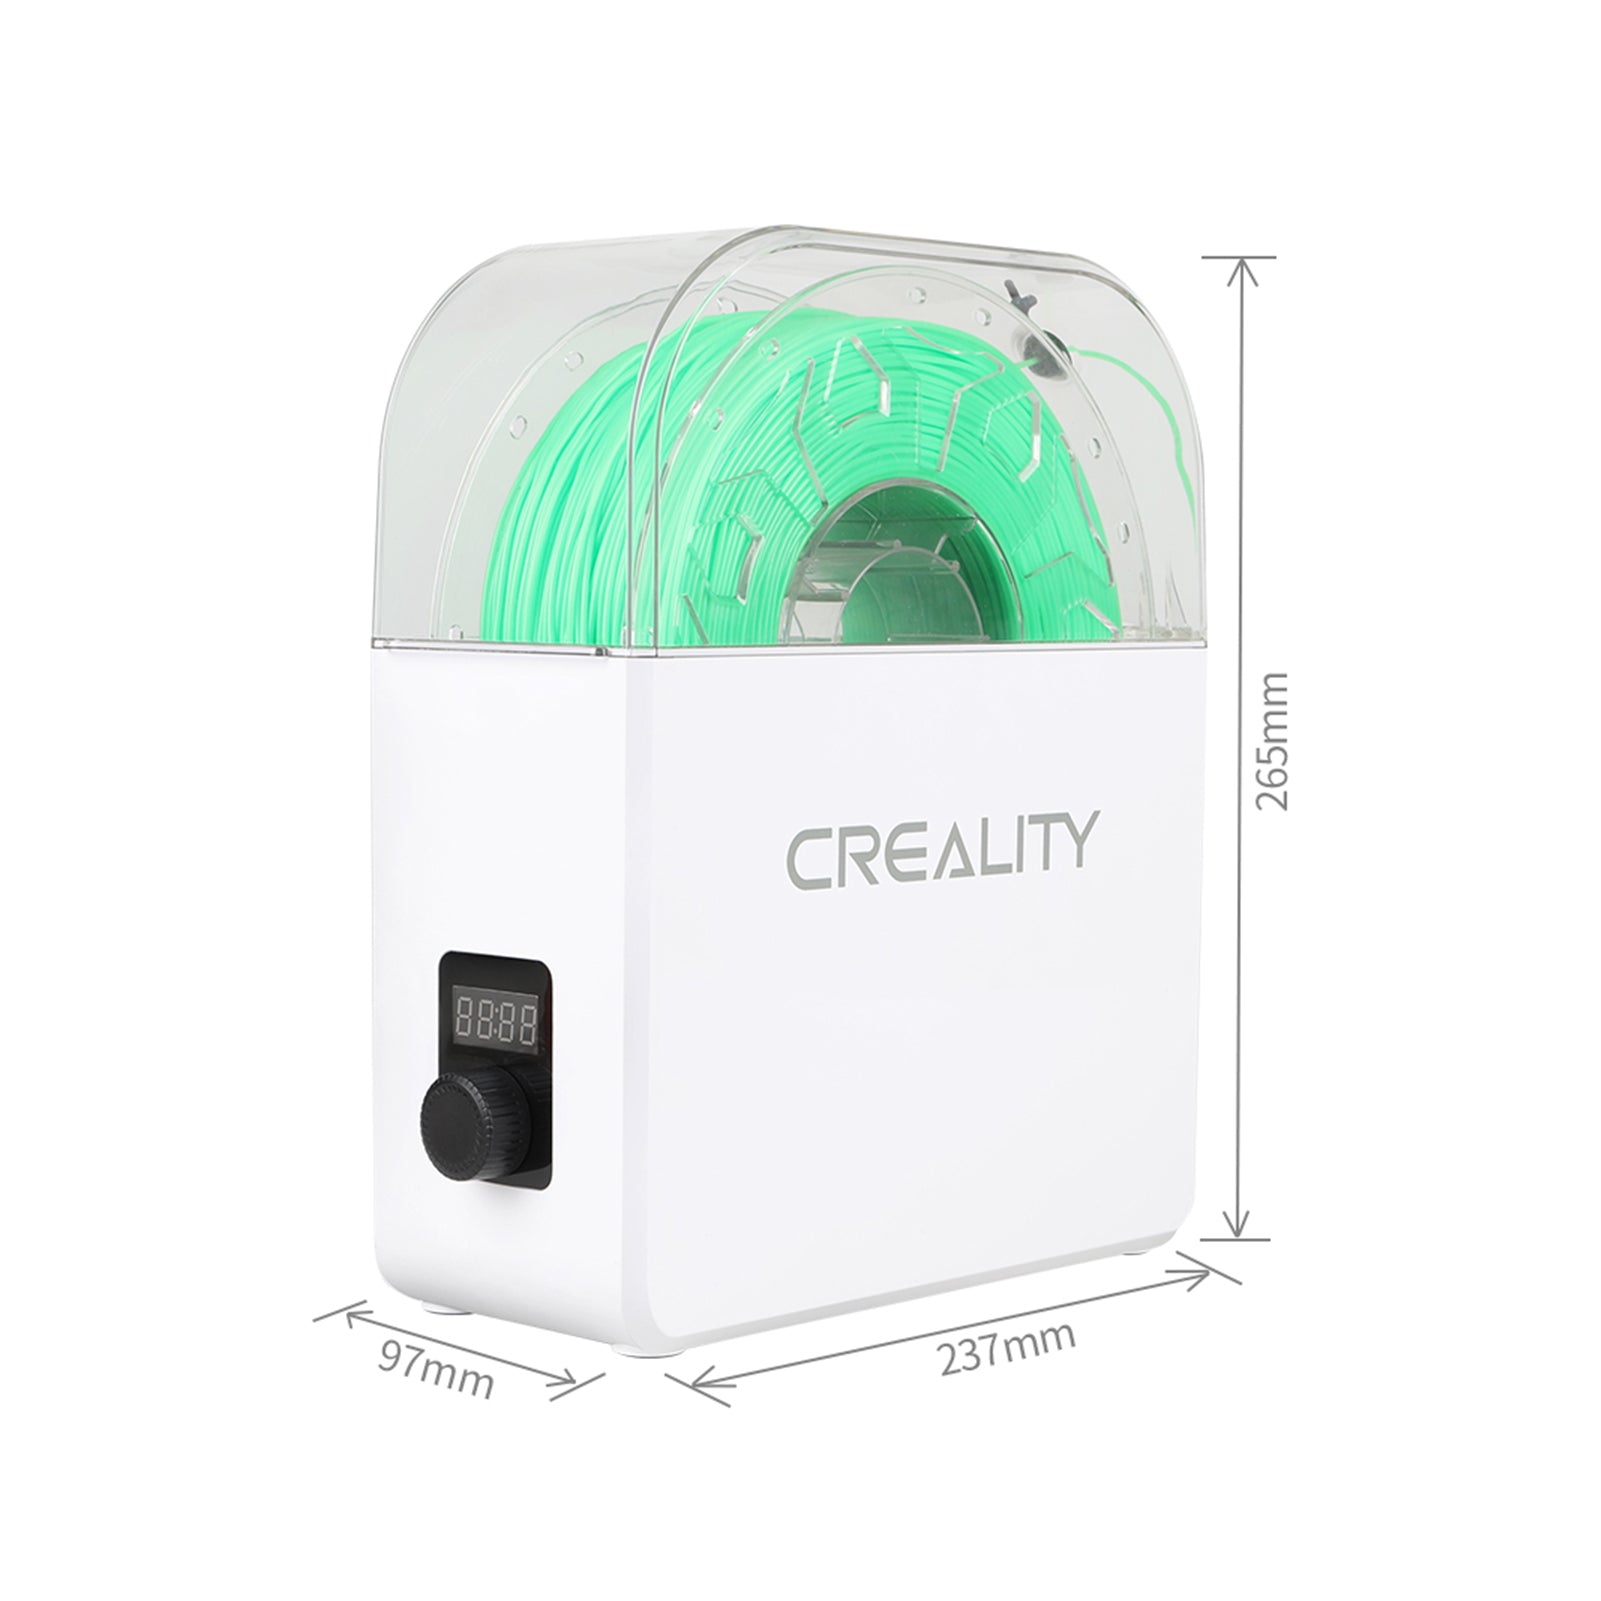 Creality 3D Printer Filament Dry Box - Printing Filament Dryer, Storage Box, Spool Holder, Time Adjustment, LCD Display, Dust-proof Moisture-proof for 1Kg Filament Printing Material Protection